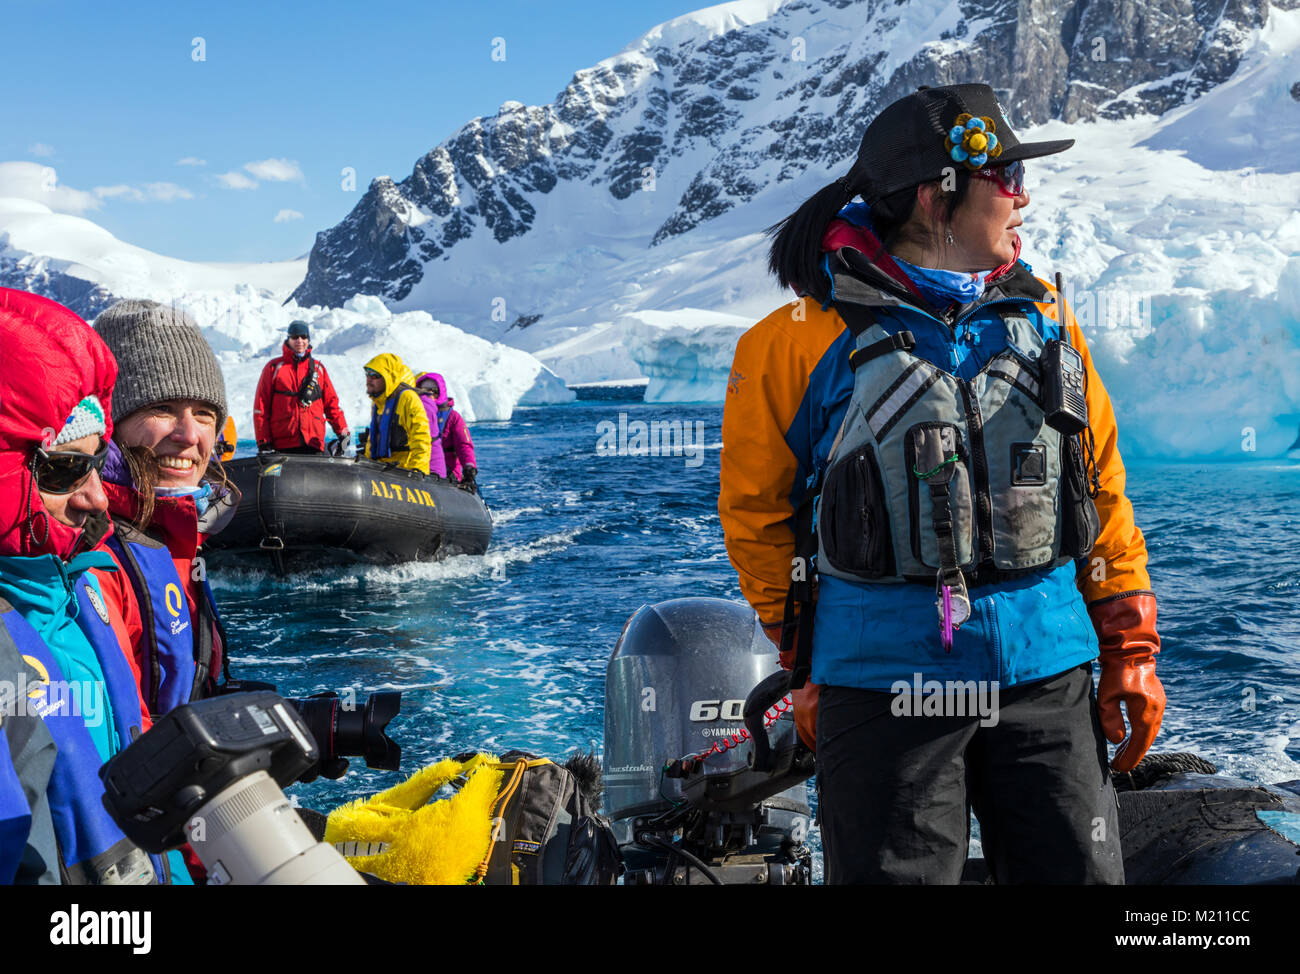 Large inflatable Zodiac boats shuttle alpine mountaineering skiers to Antarctica from the passenger ship Ocean Adventurer; Nansen Island Stock Photo